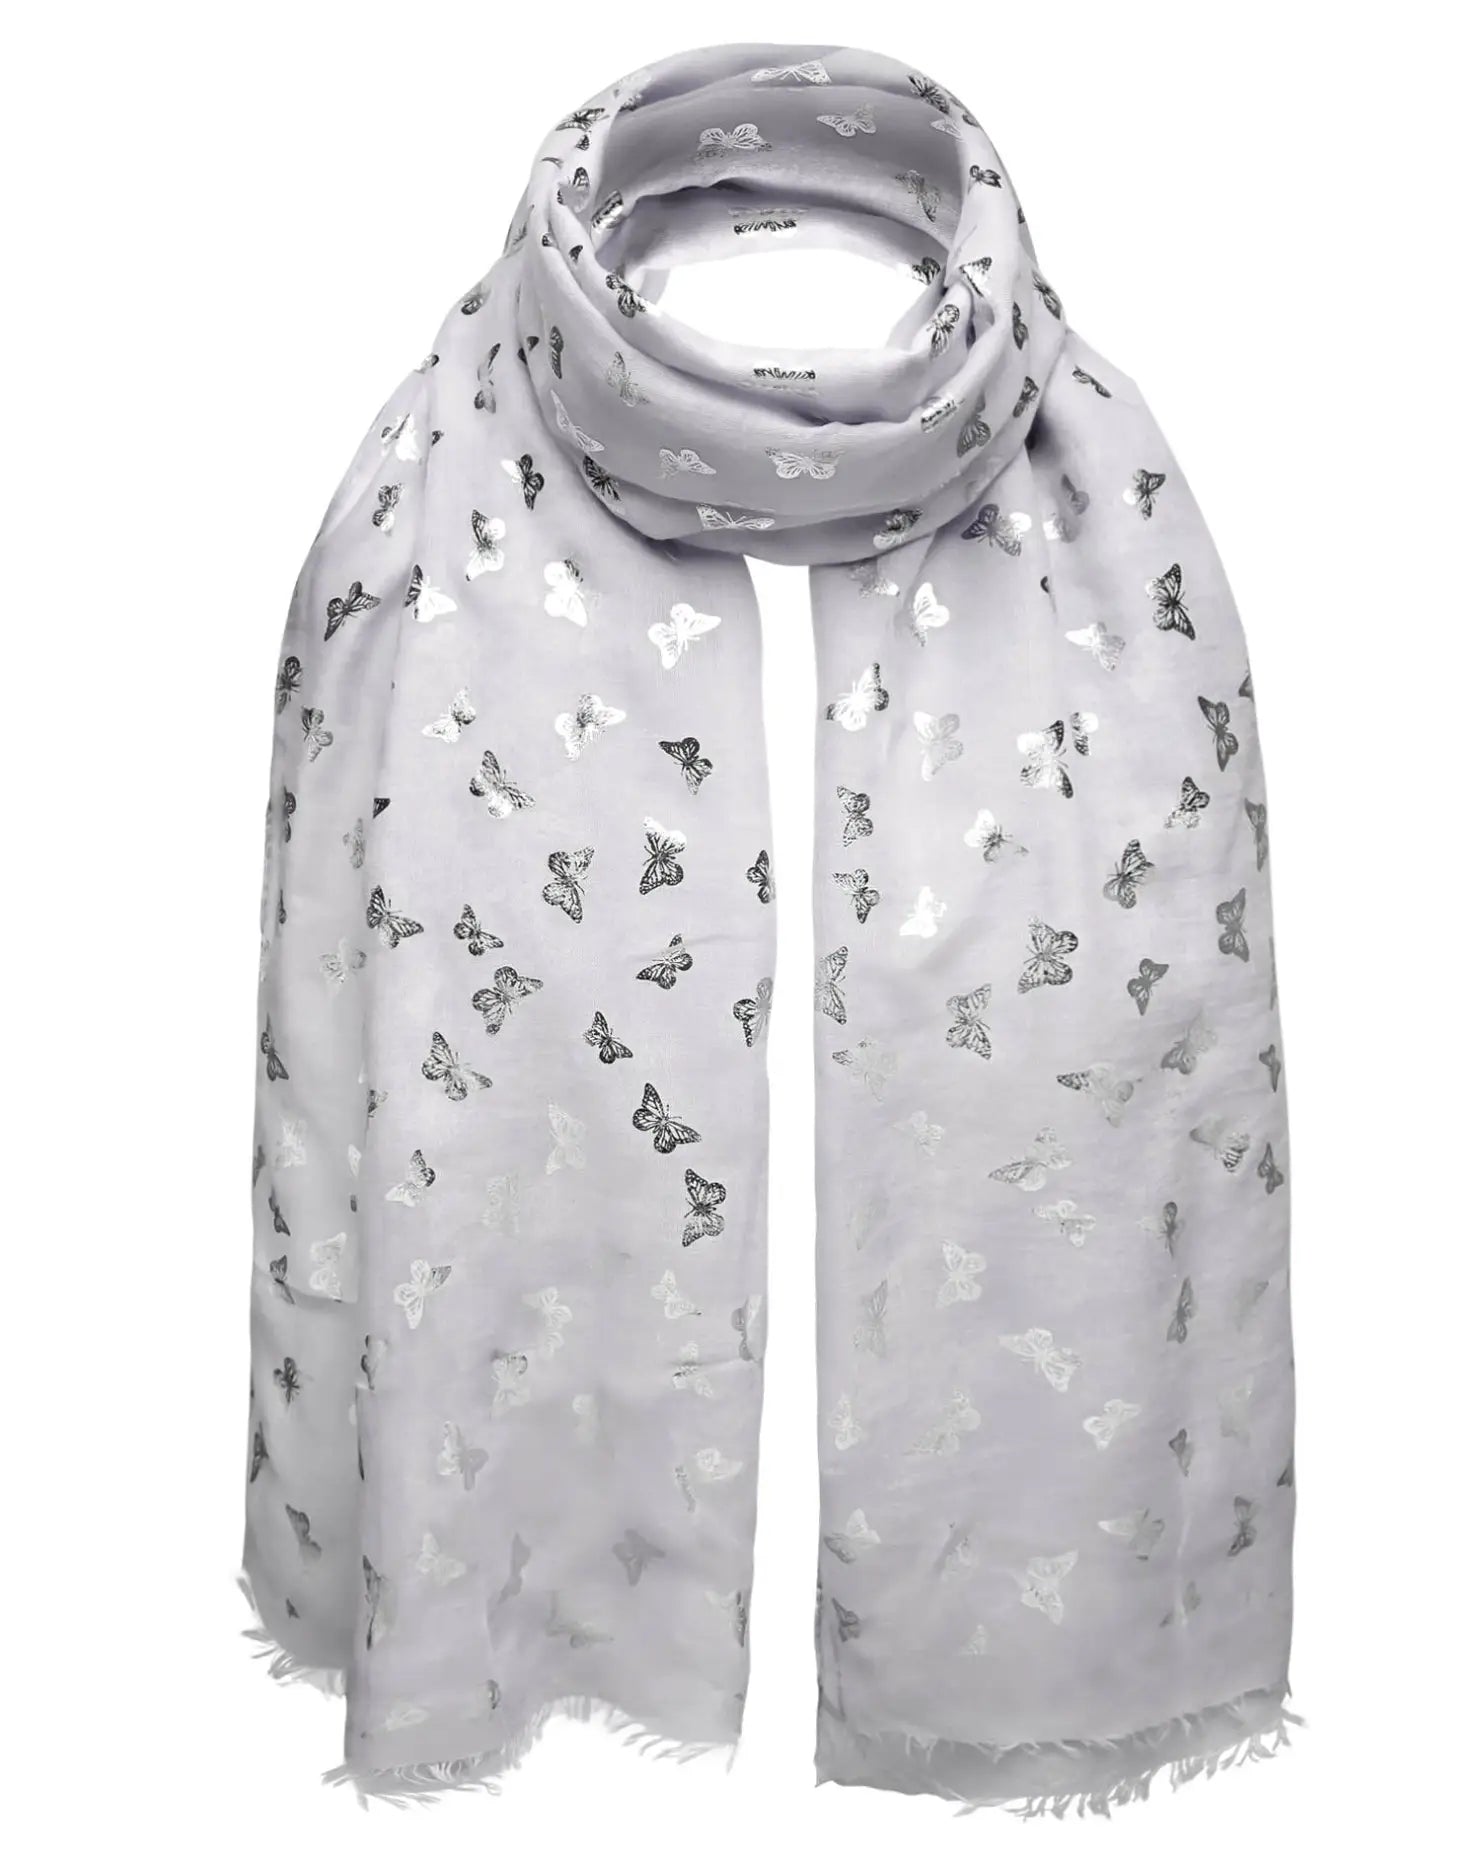 Butterfly print oversized scarf with silver foil butterflies